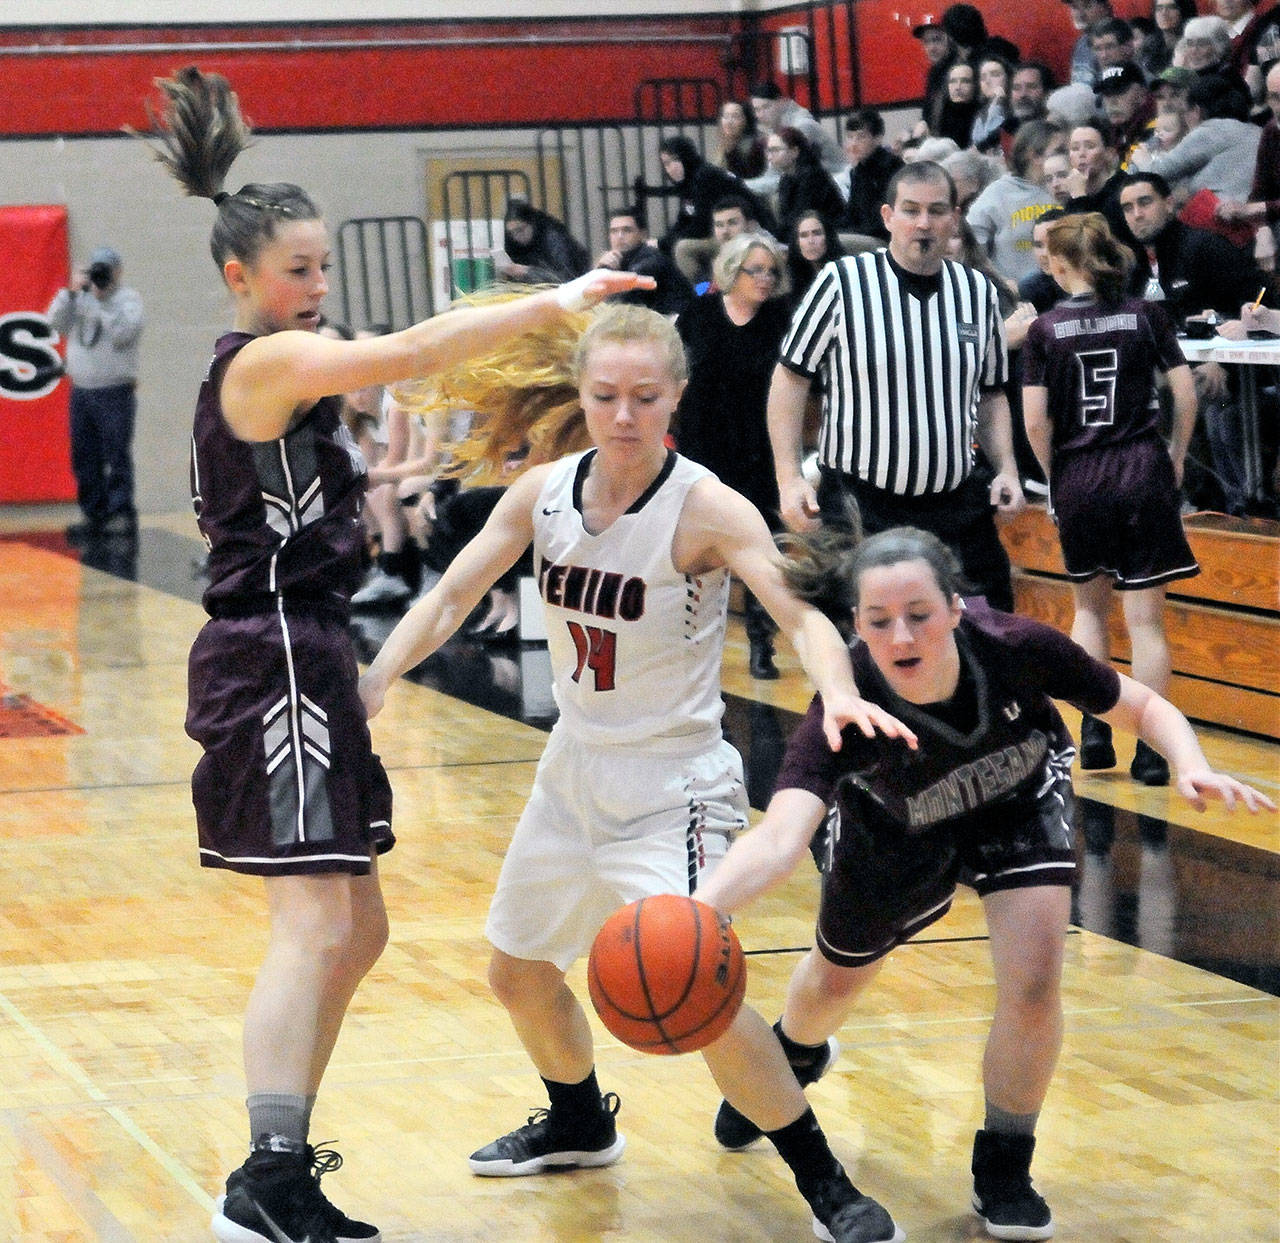 Montsano’s Lexi Lovell, right, steals the ball from Tenino’s Charlie Letts in the first quarter on Tuesday. Montesano had 11 steals in its 51-37 win over Tenino. (Hasani Grayson | Grays Harbor News Group)